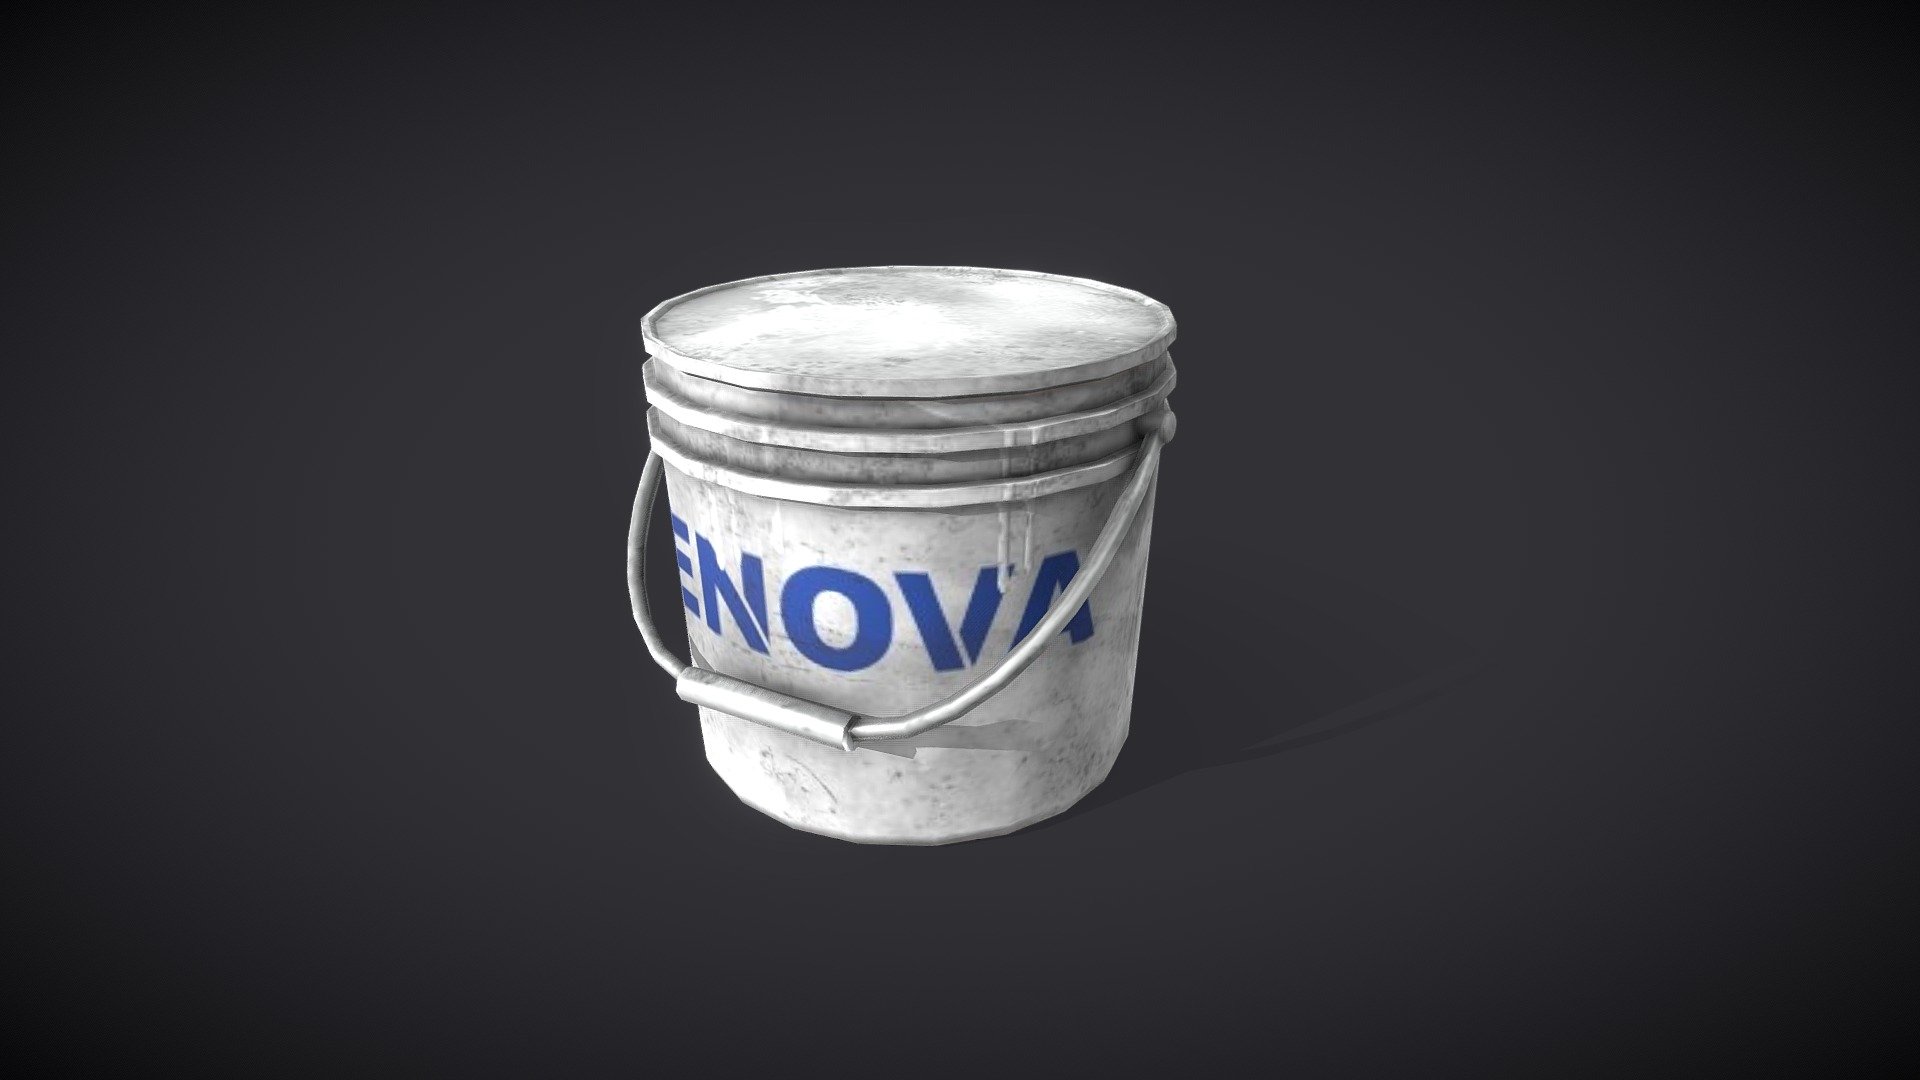 Paint Bucket



Dimensions : 0.362m x 0.348m x 0.307m

Texture : PBR, 1024, plastic

Files Include : Textures, GLB

Usage : VR, Game ready

.............

OVA’s flagship software, StellarX, allows those with no programming or coding knowledge to place 3D goods and create immersive experiences through simple drag-and-drop actions. 

Storytelling, which involves a series of interactions, sequences, and triggers are easily created through OVA’s patent-pending visual scripting tool. 

.............

**Download StellarX on the Meta Quest Store: oculus.com/experiences/quest/8132958546745663
**

**Download StellarX on Steam: store.steampowered.com/app/1214640/StellarX
**

Have a bigger immersive project in mind? Get in touch with us! 



StellarX on LinkedIn: linkedin.com/showcase/stellarx-by-ova

Join the StellarX Discord server! 

........

StellarX© 2024 - Paint Bucket - Buy Royalty Free 3D model by StellarX 3d model